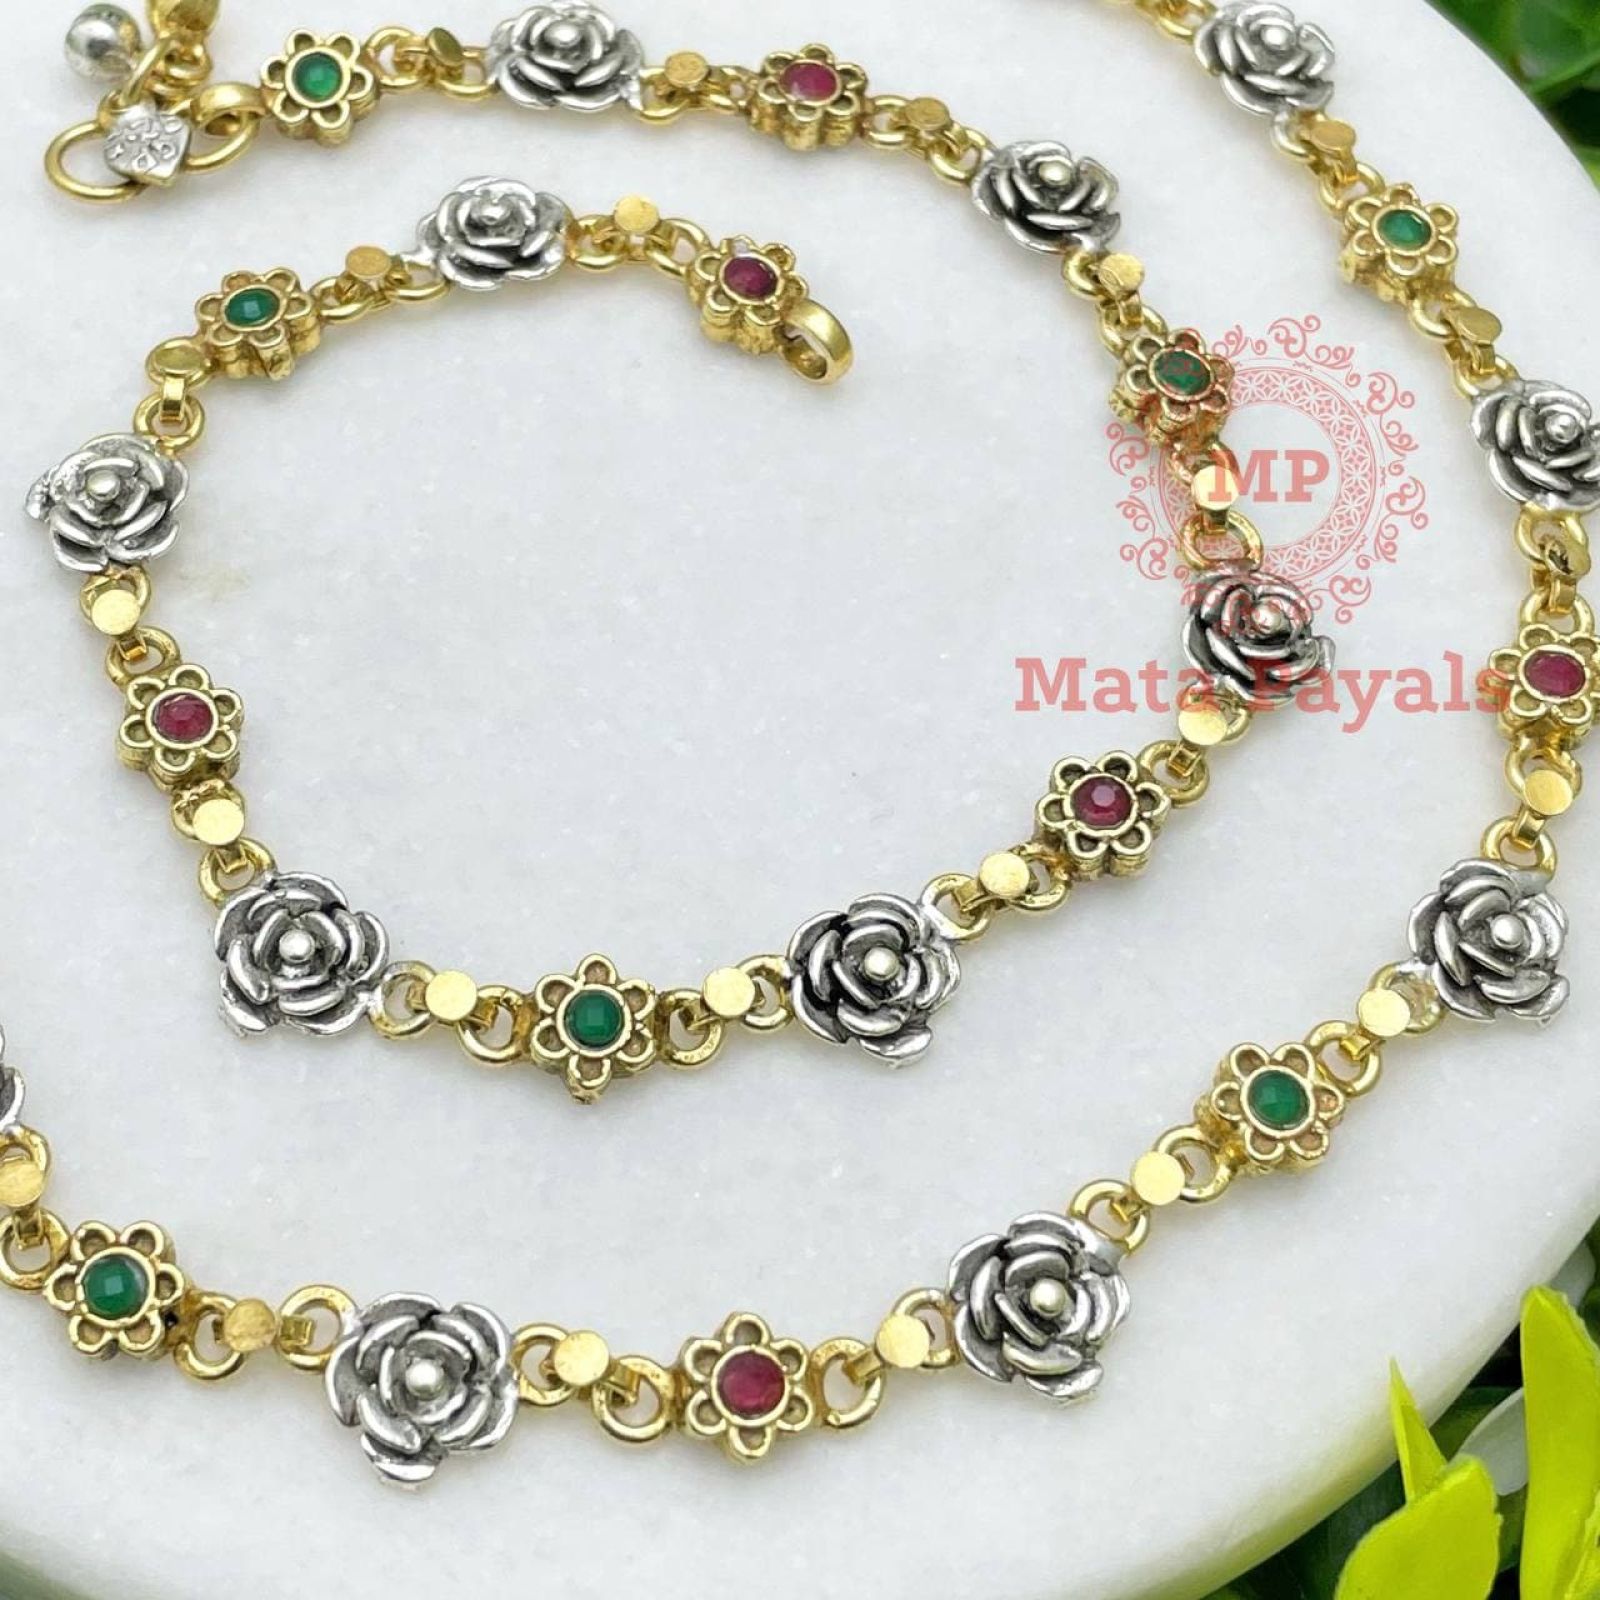 Captivating Rose Colourful Silver Anklet